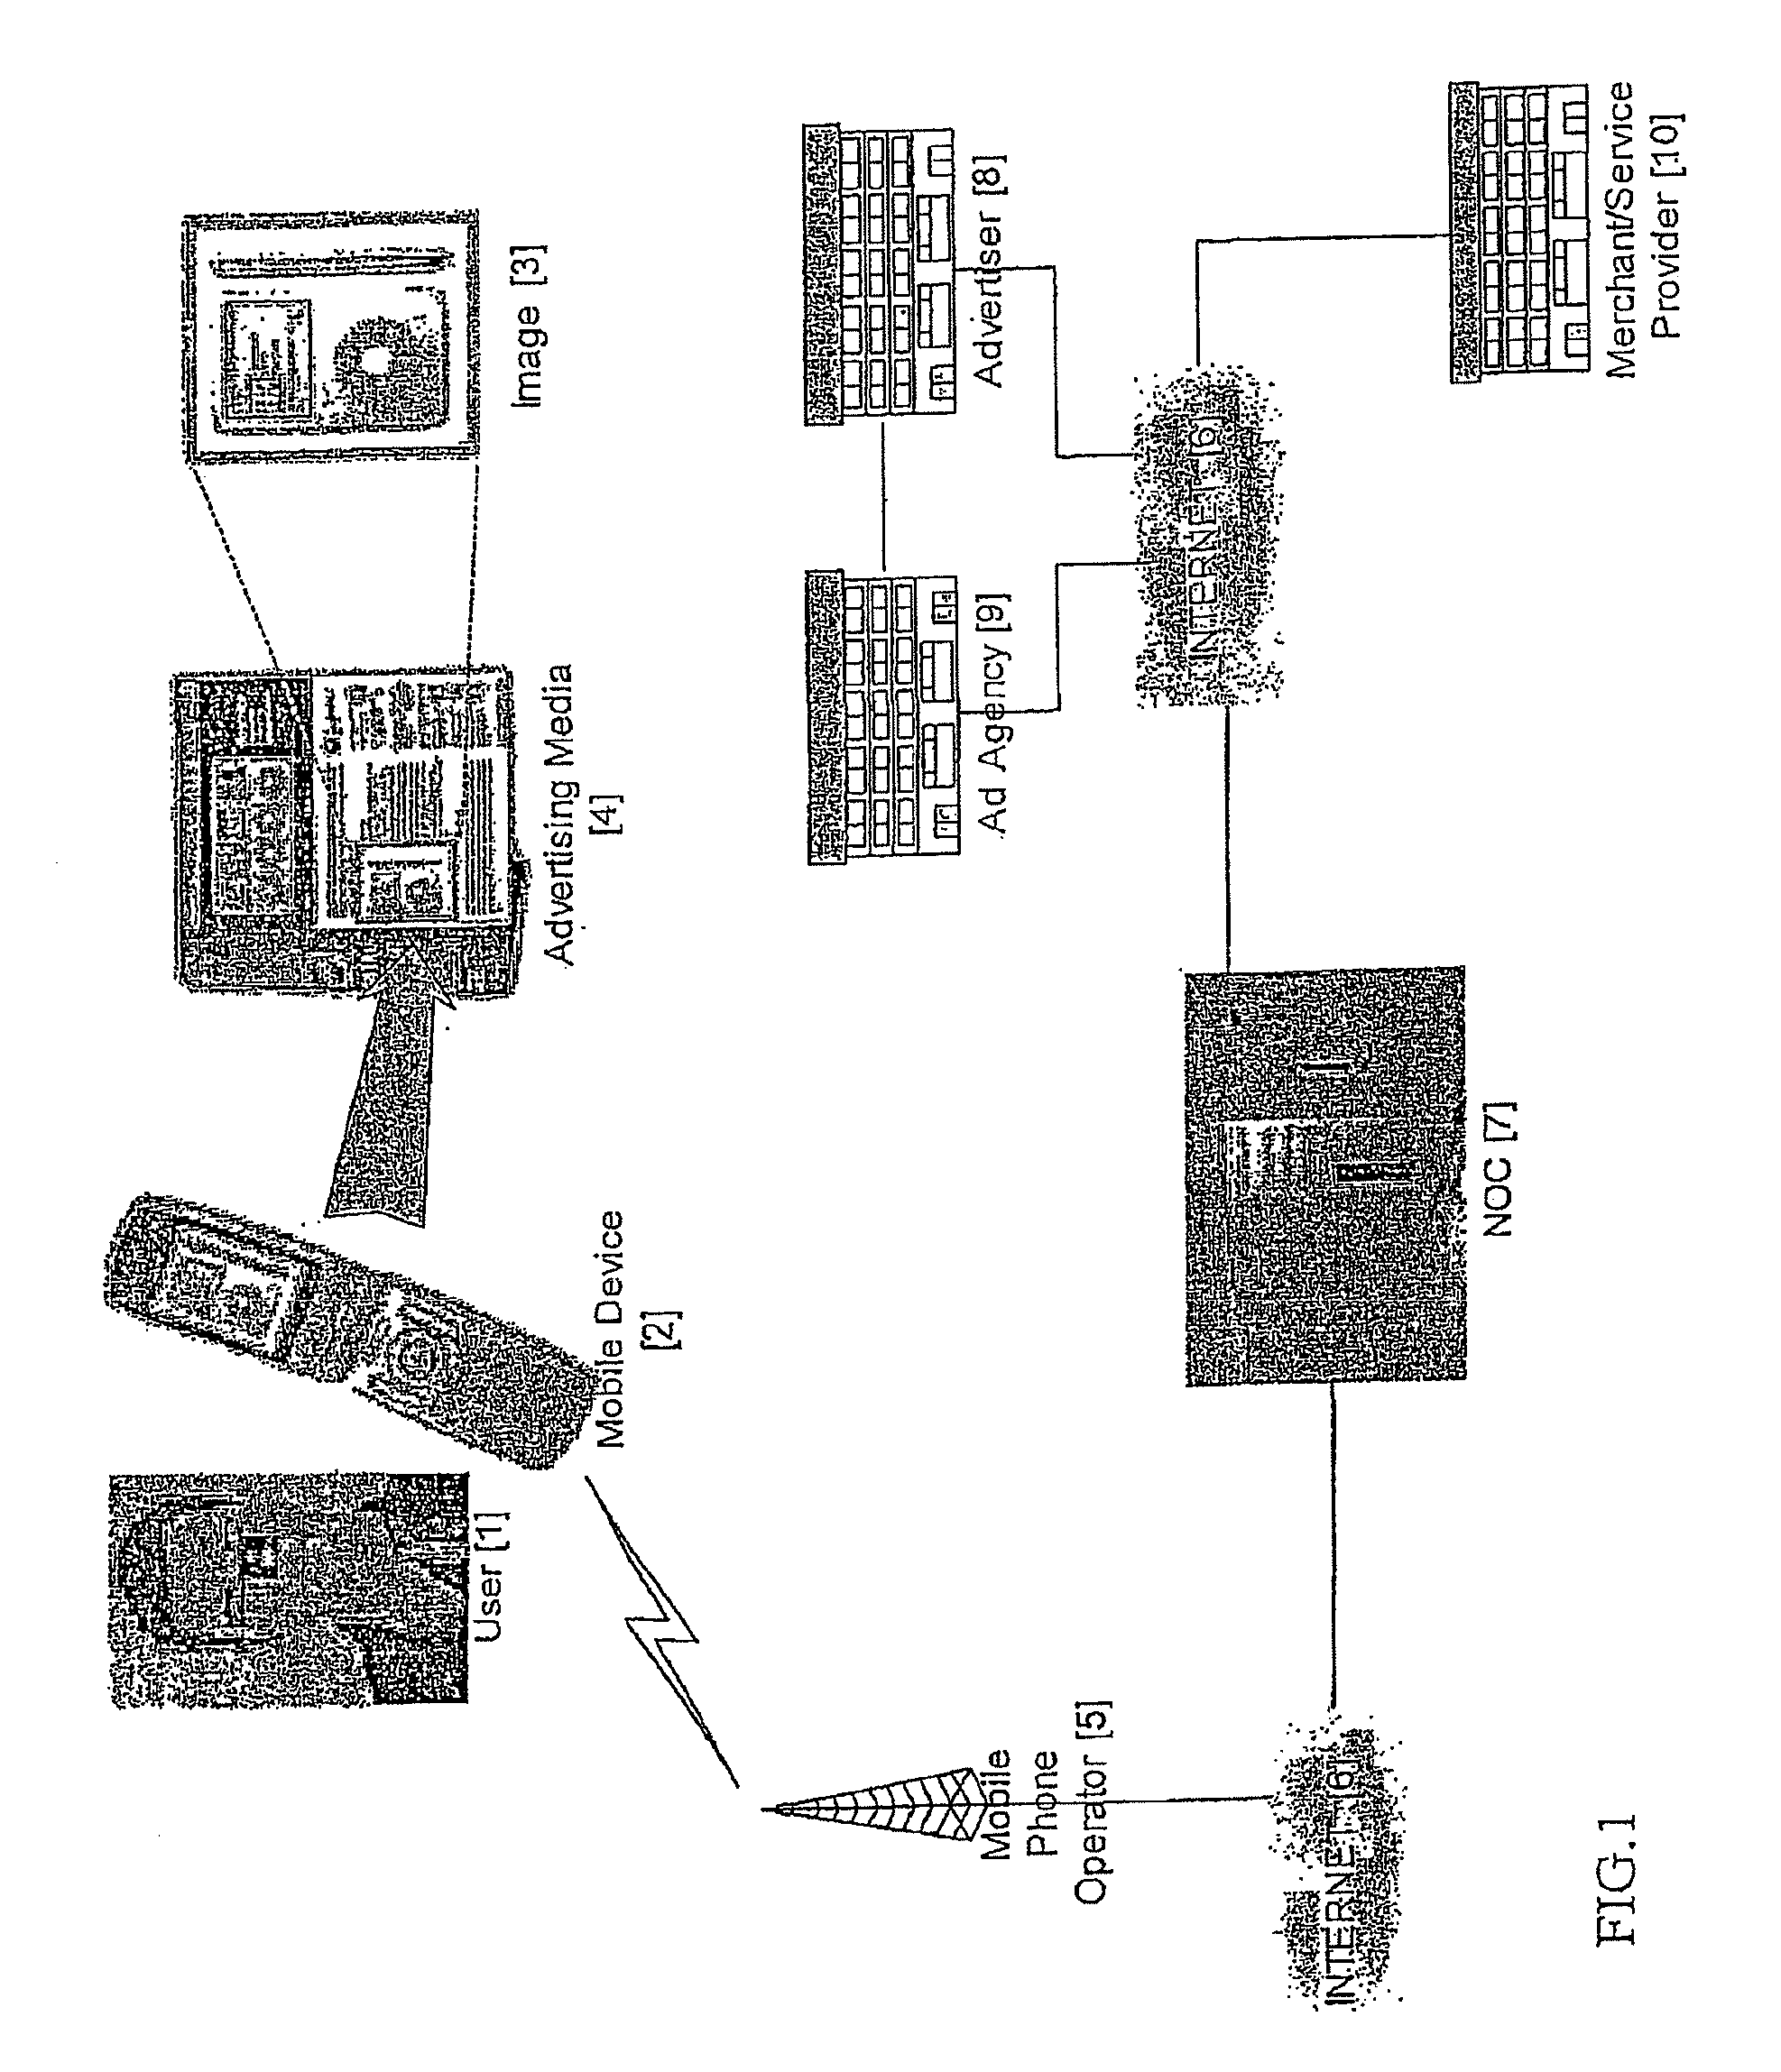 System and method for distributing targeted content